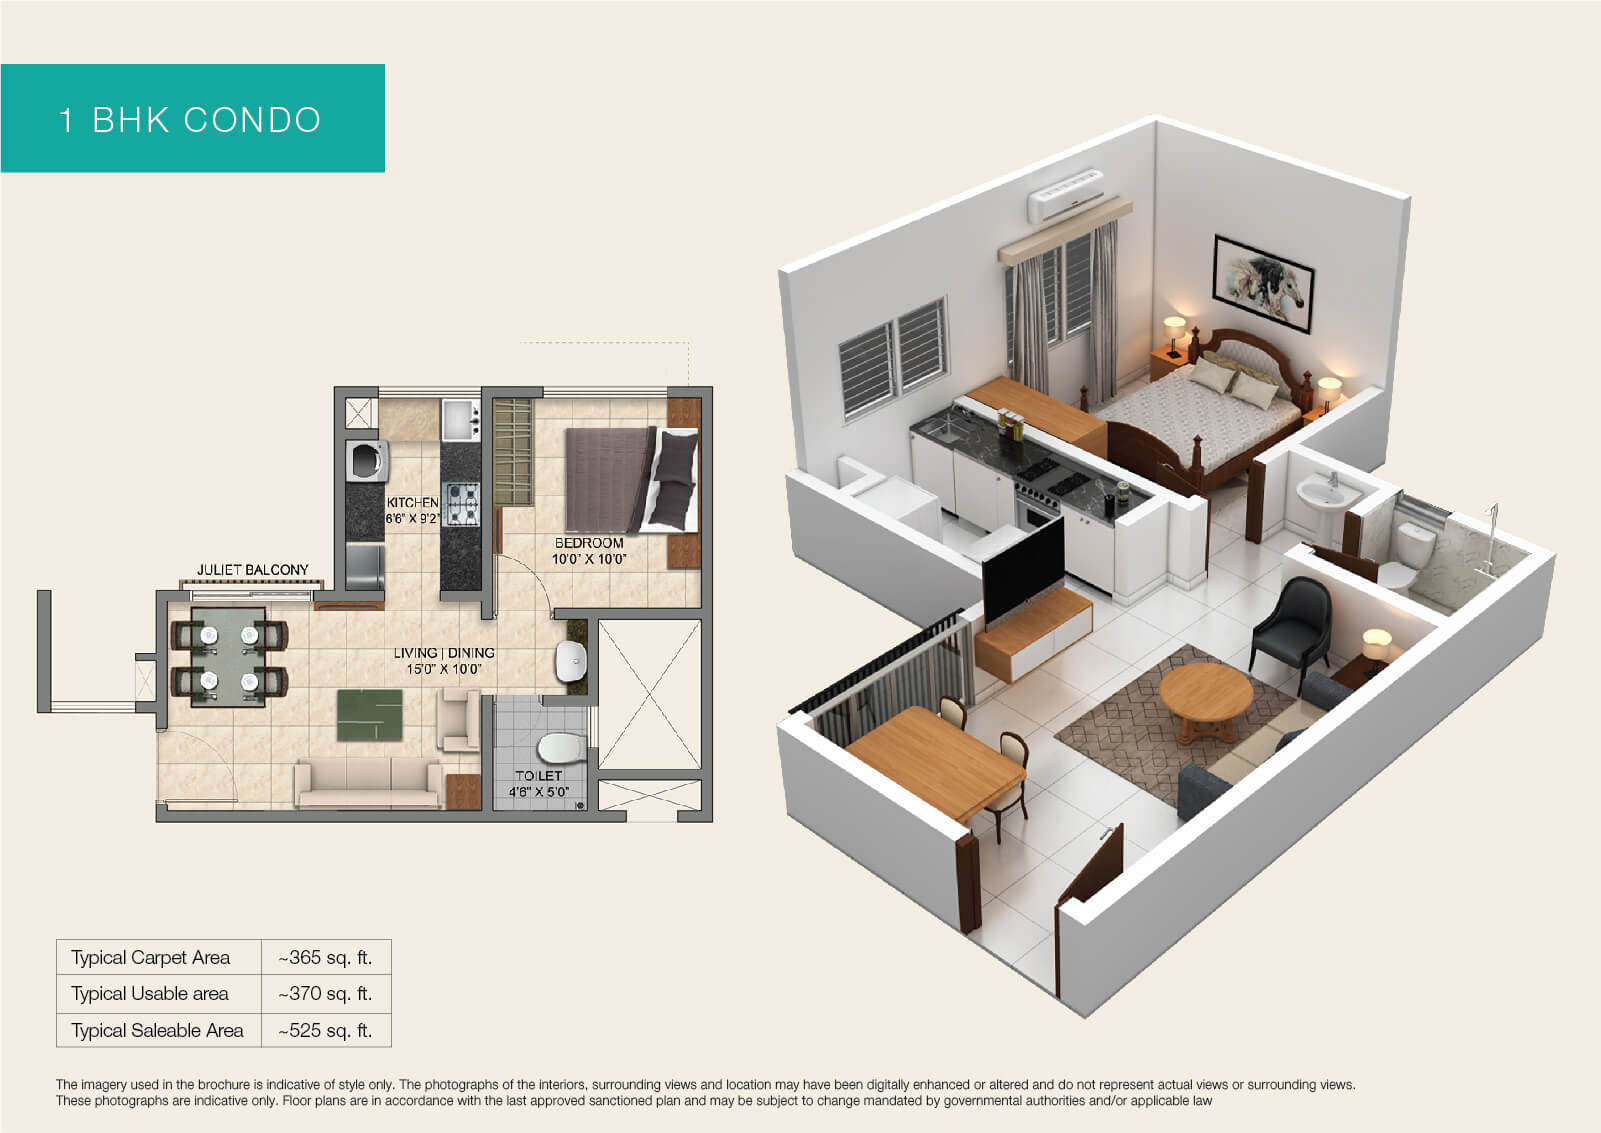 Provident Park Square Luxury Apartments In Kanakapura Road 1 2 3 Bhk Apartments In Kanakapura Road